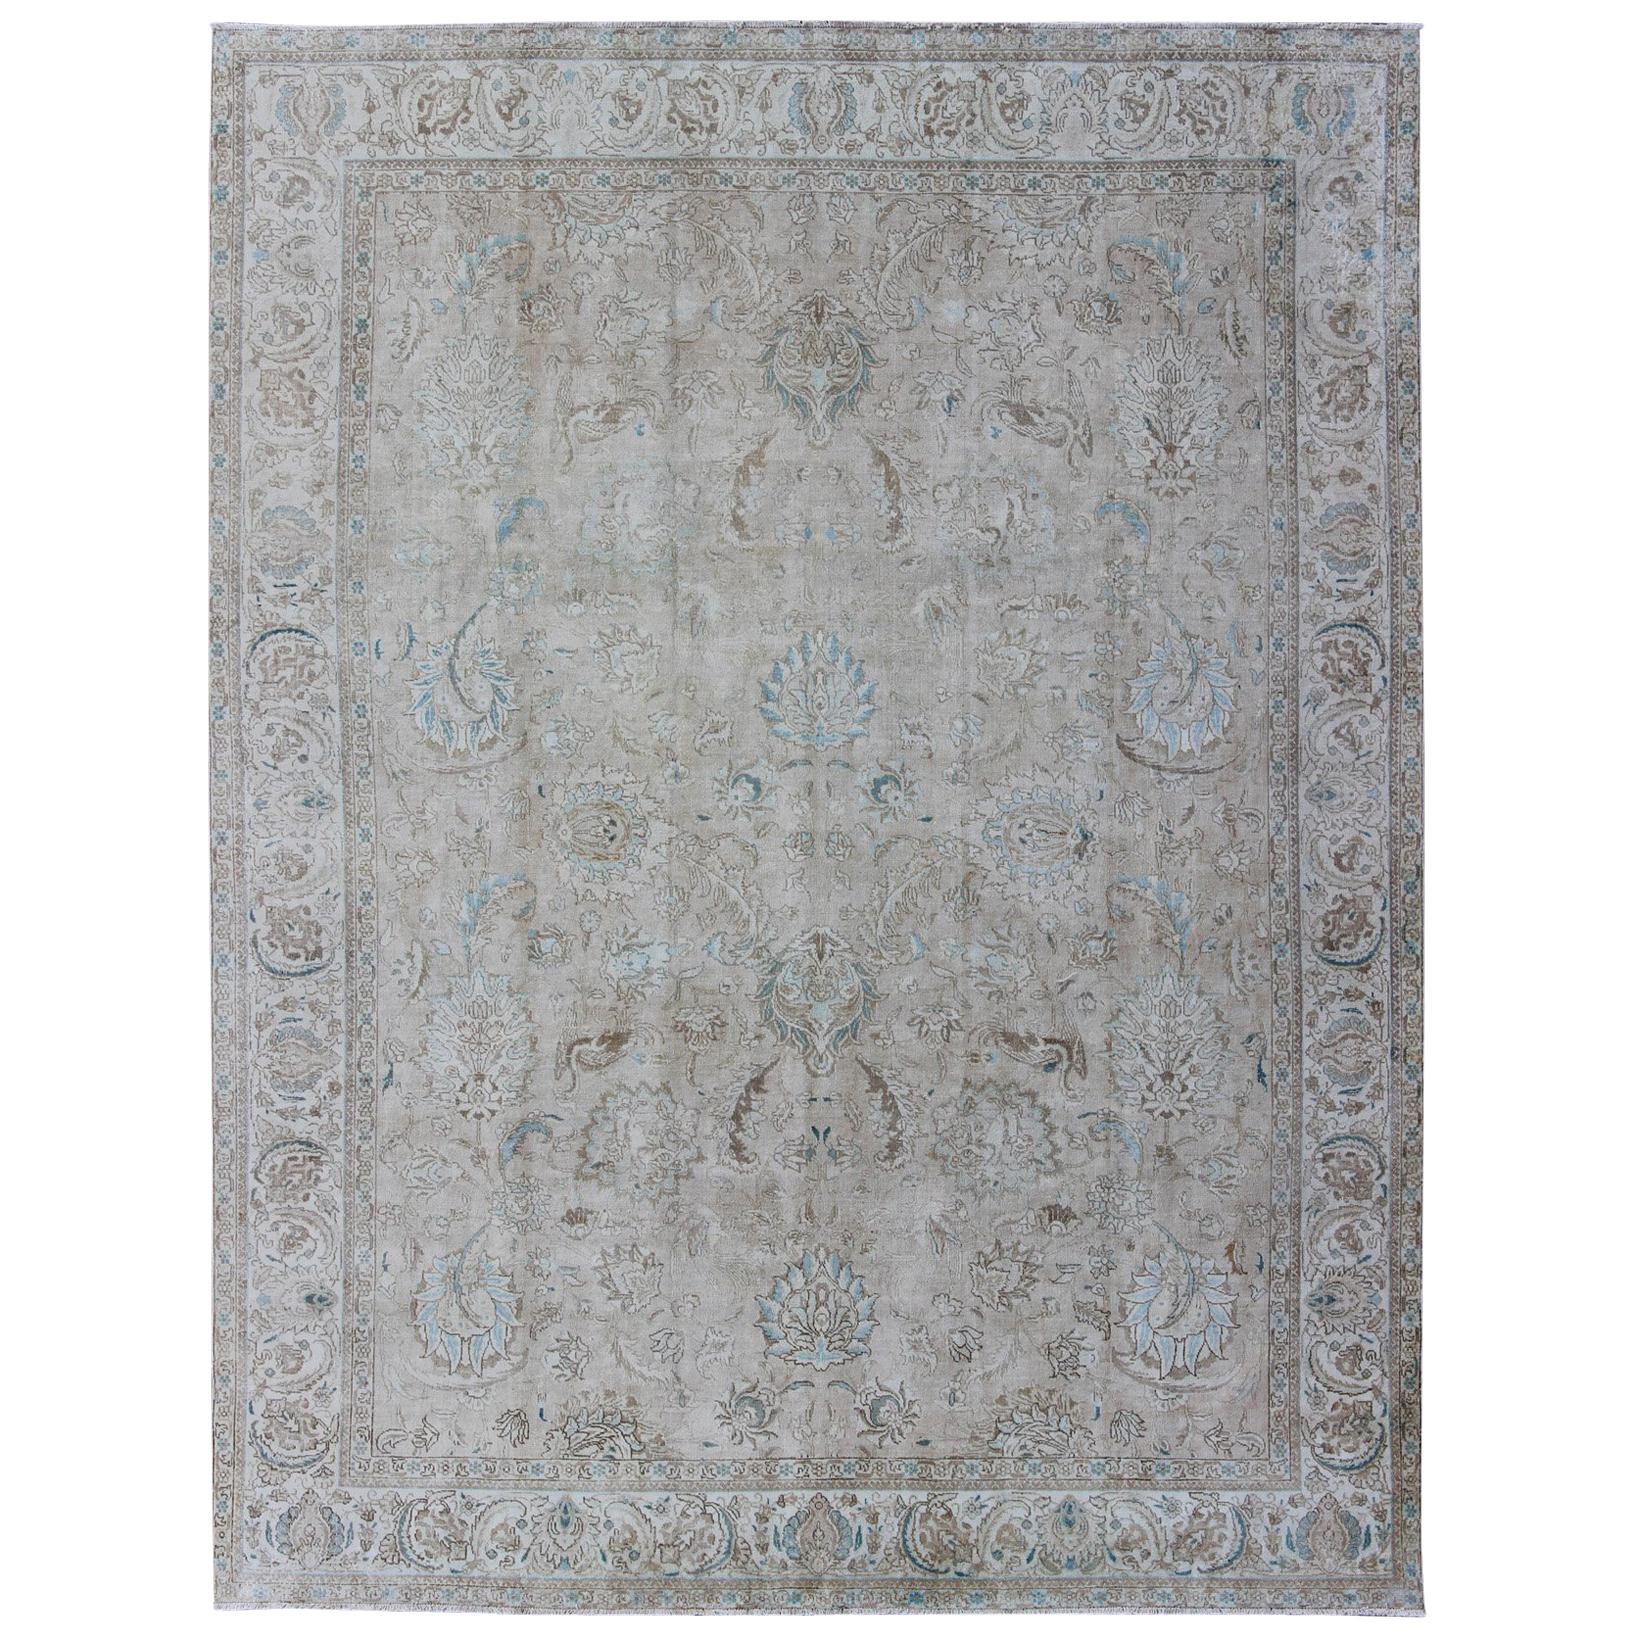 Muted Gray, Blue, and Ivory Vintage Persian Tabriz Rug with Floral ...